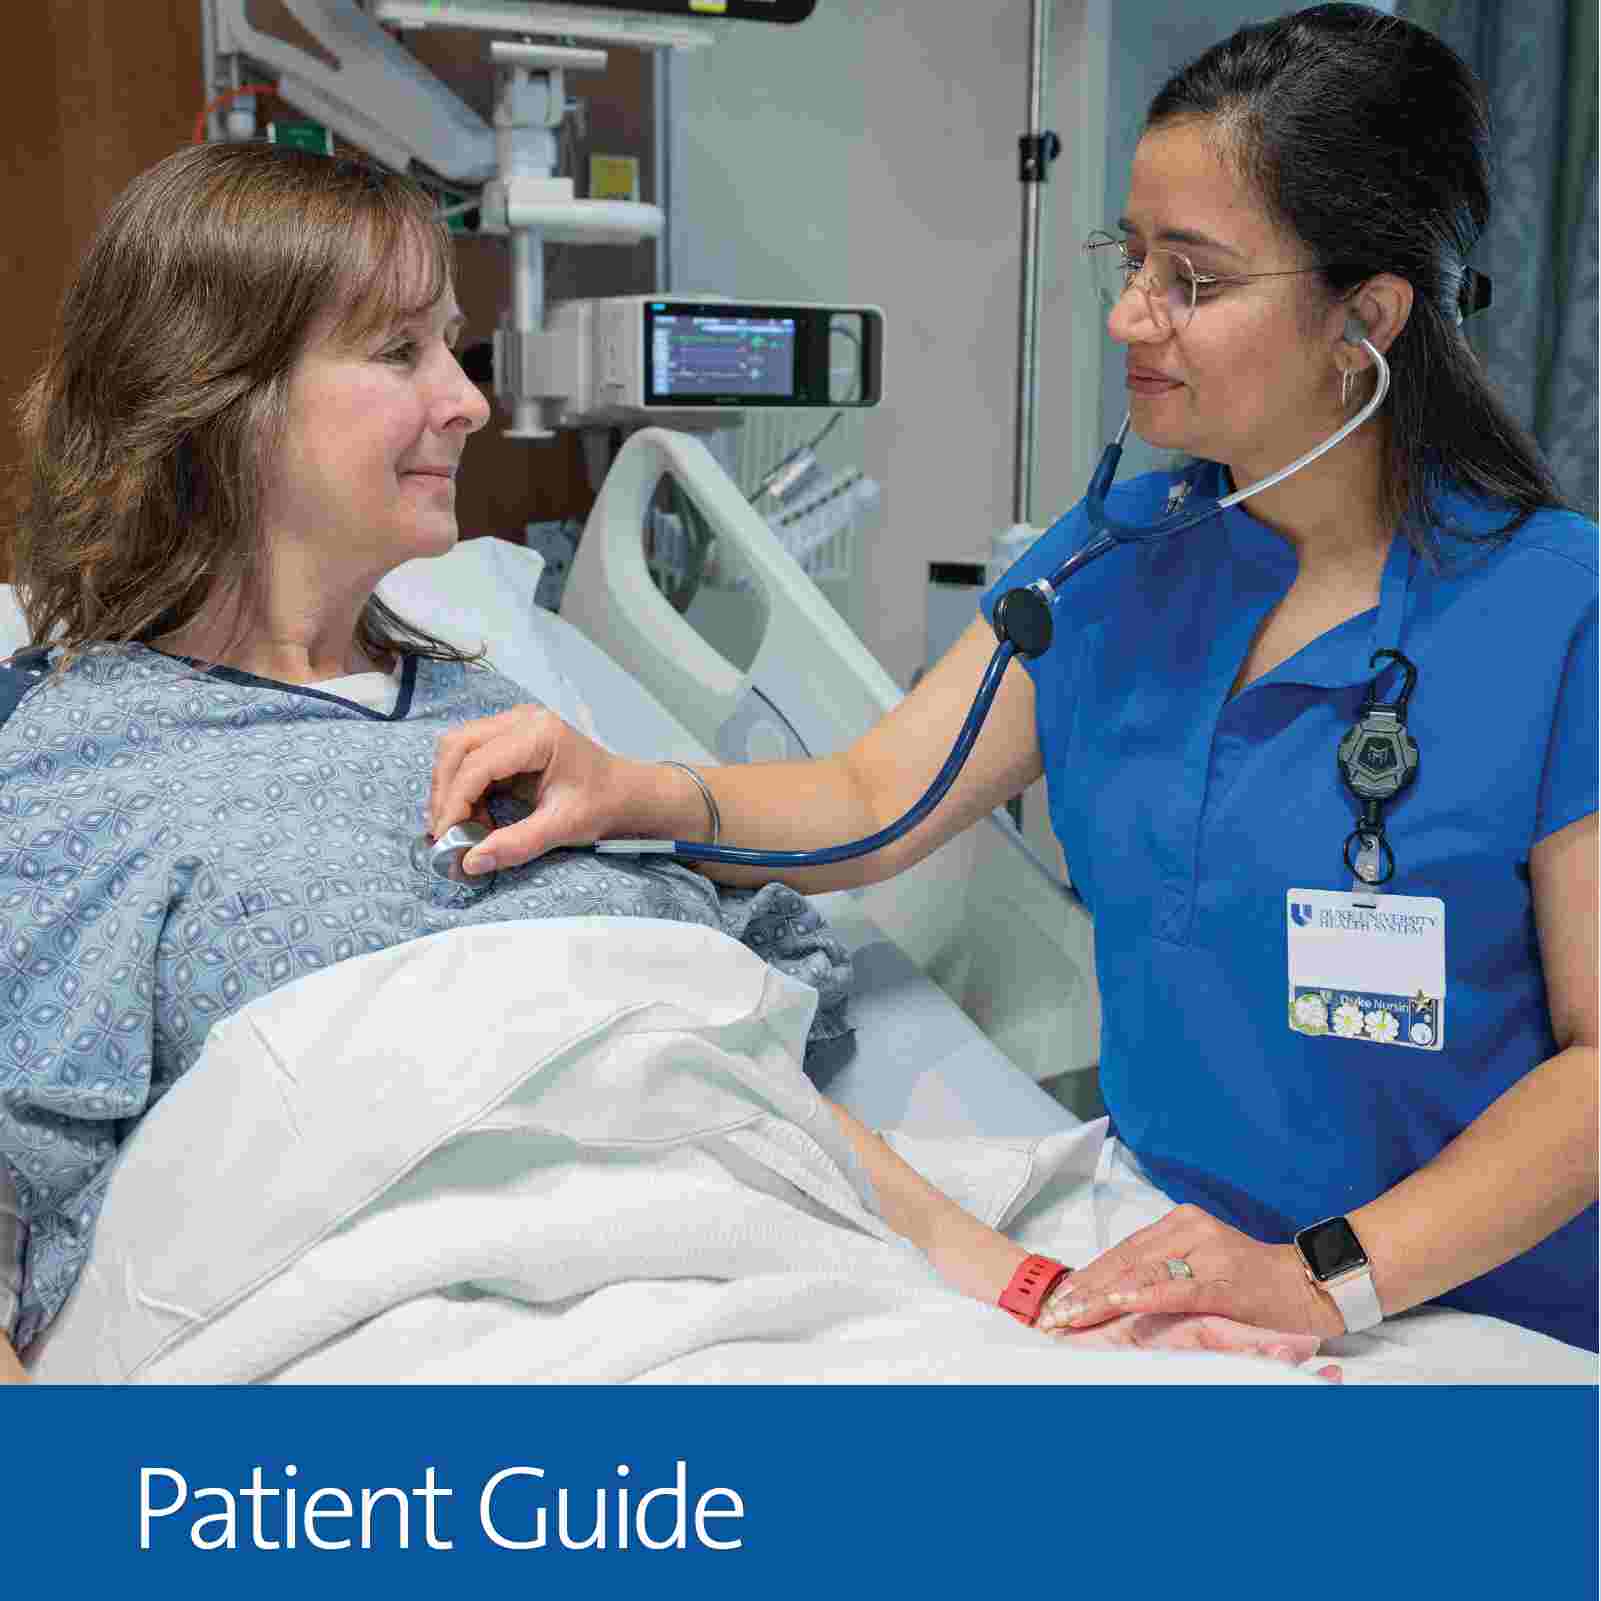 Duke Raleigh Hospital patient guide cover shows provider and patient in hospital room